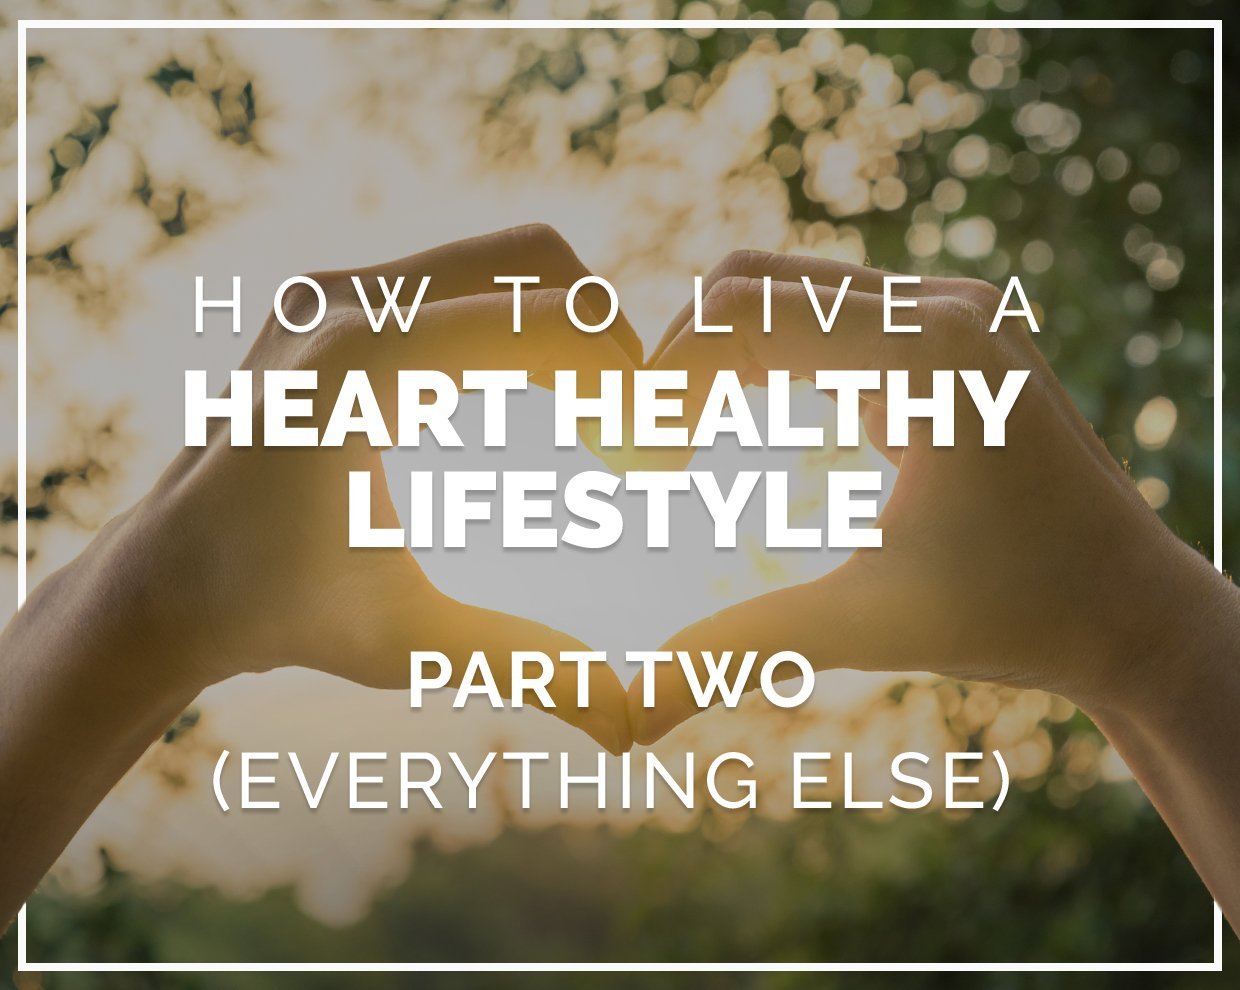 How to live a heart healthy lifestyle - Part Two 